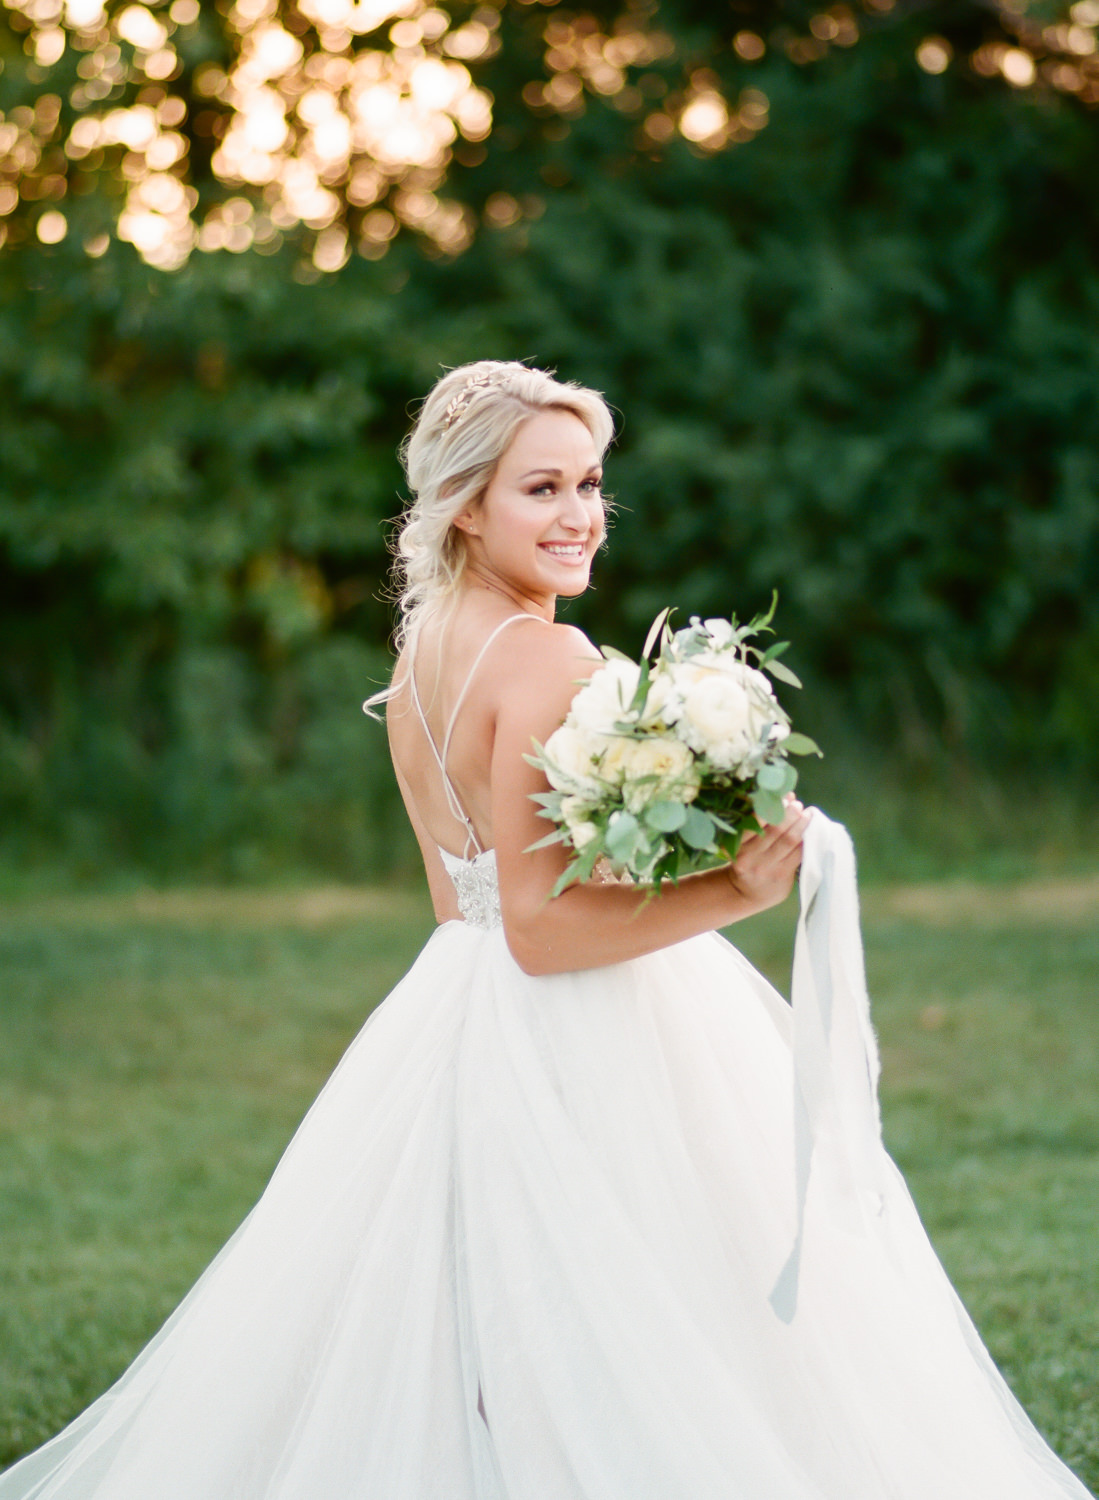 St. Louis bridal session at sunset, Norman's Bridal